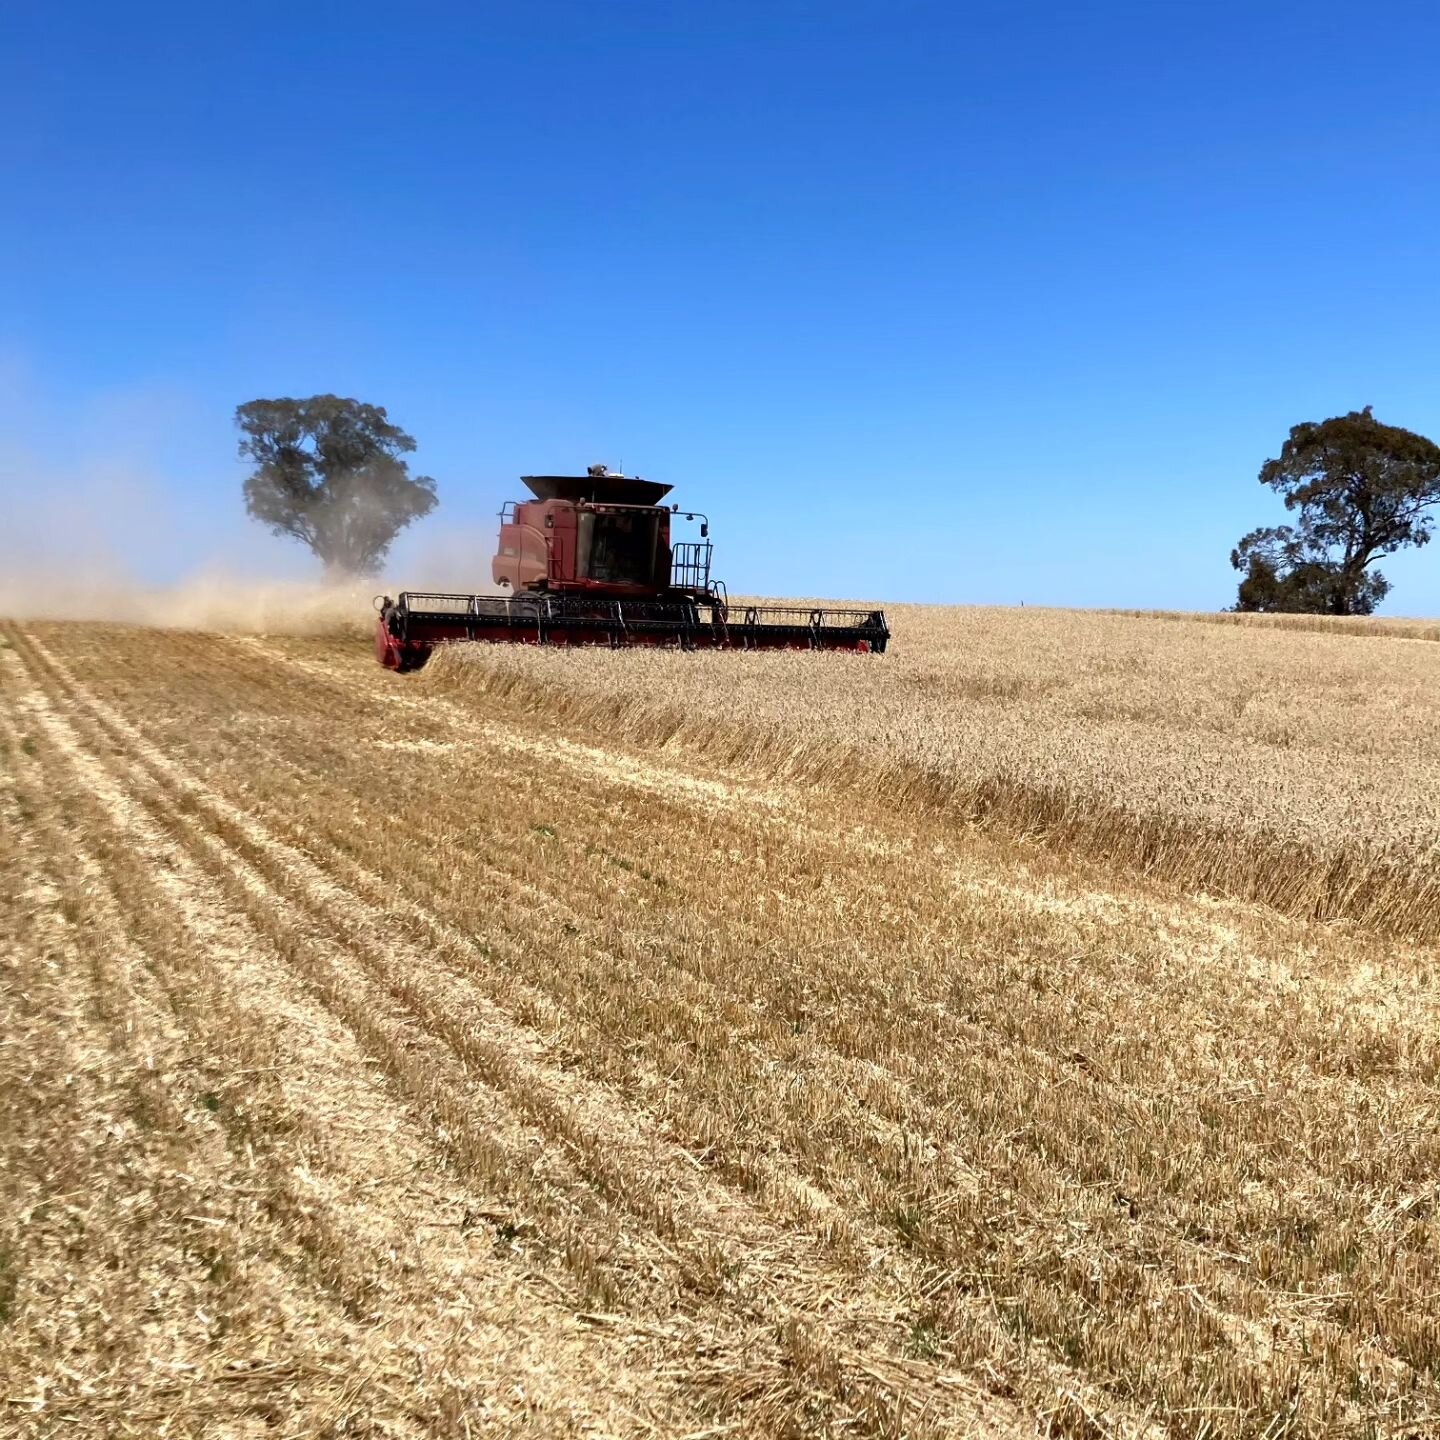 Great feeling to get this wheat crop off before Christmas after some challenging summer rain. Making short work of this high yield whea crop, the harvester is quite an amazing machine

#bluegum #wheat #barossa #barossavalley #westernbarossa #westernr